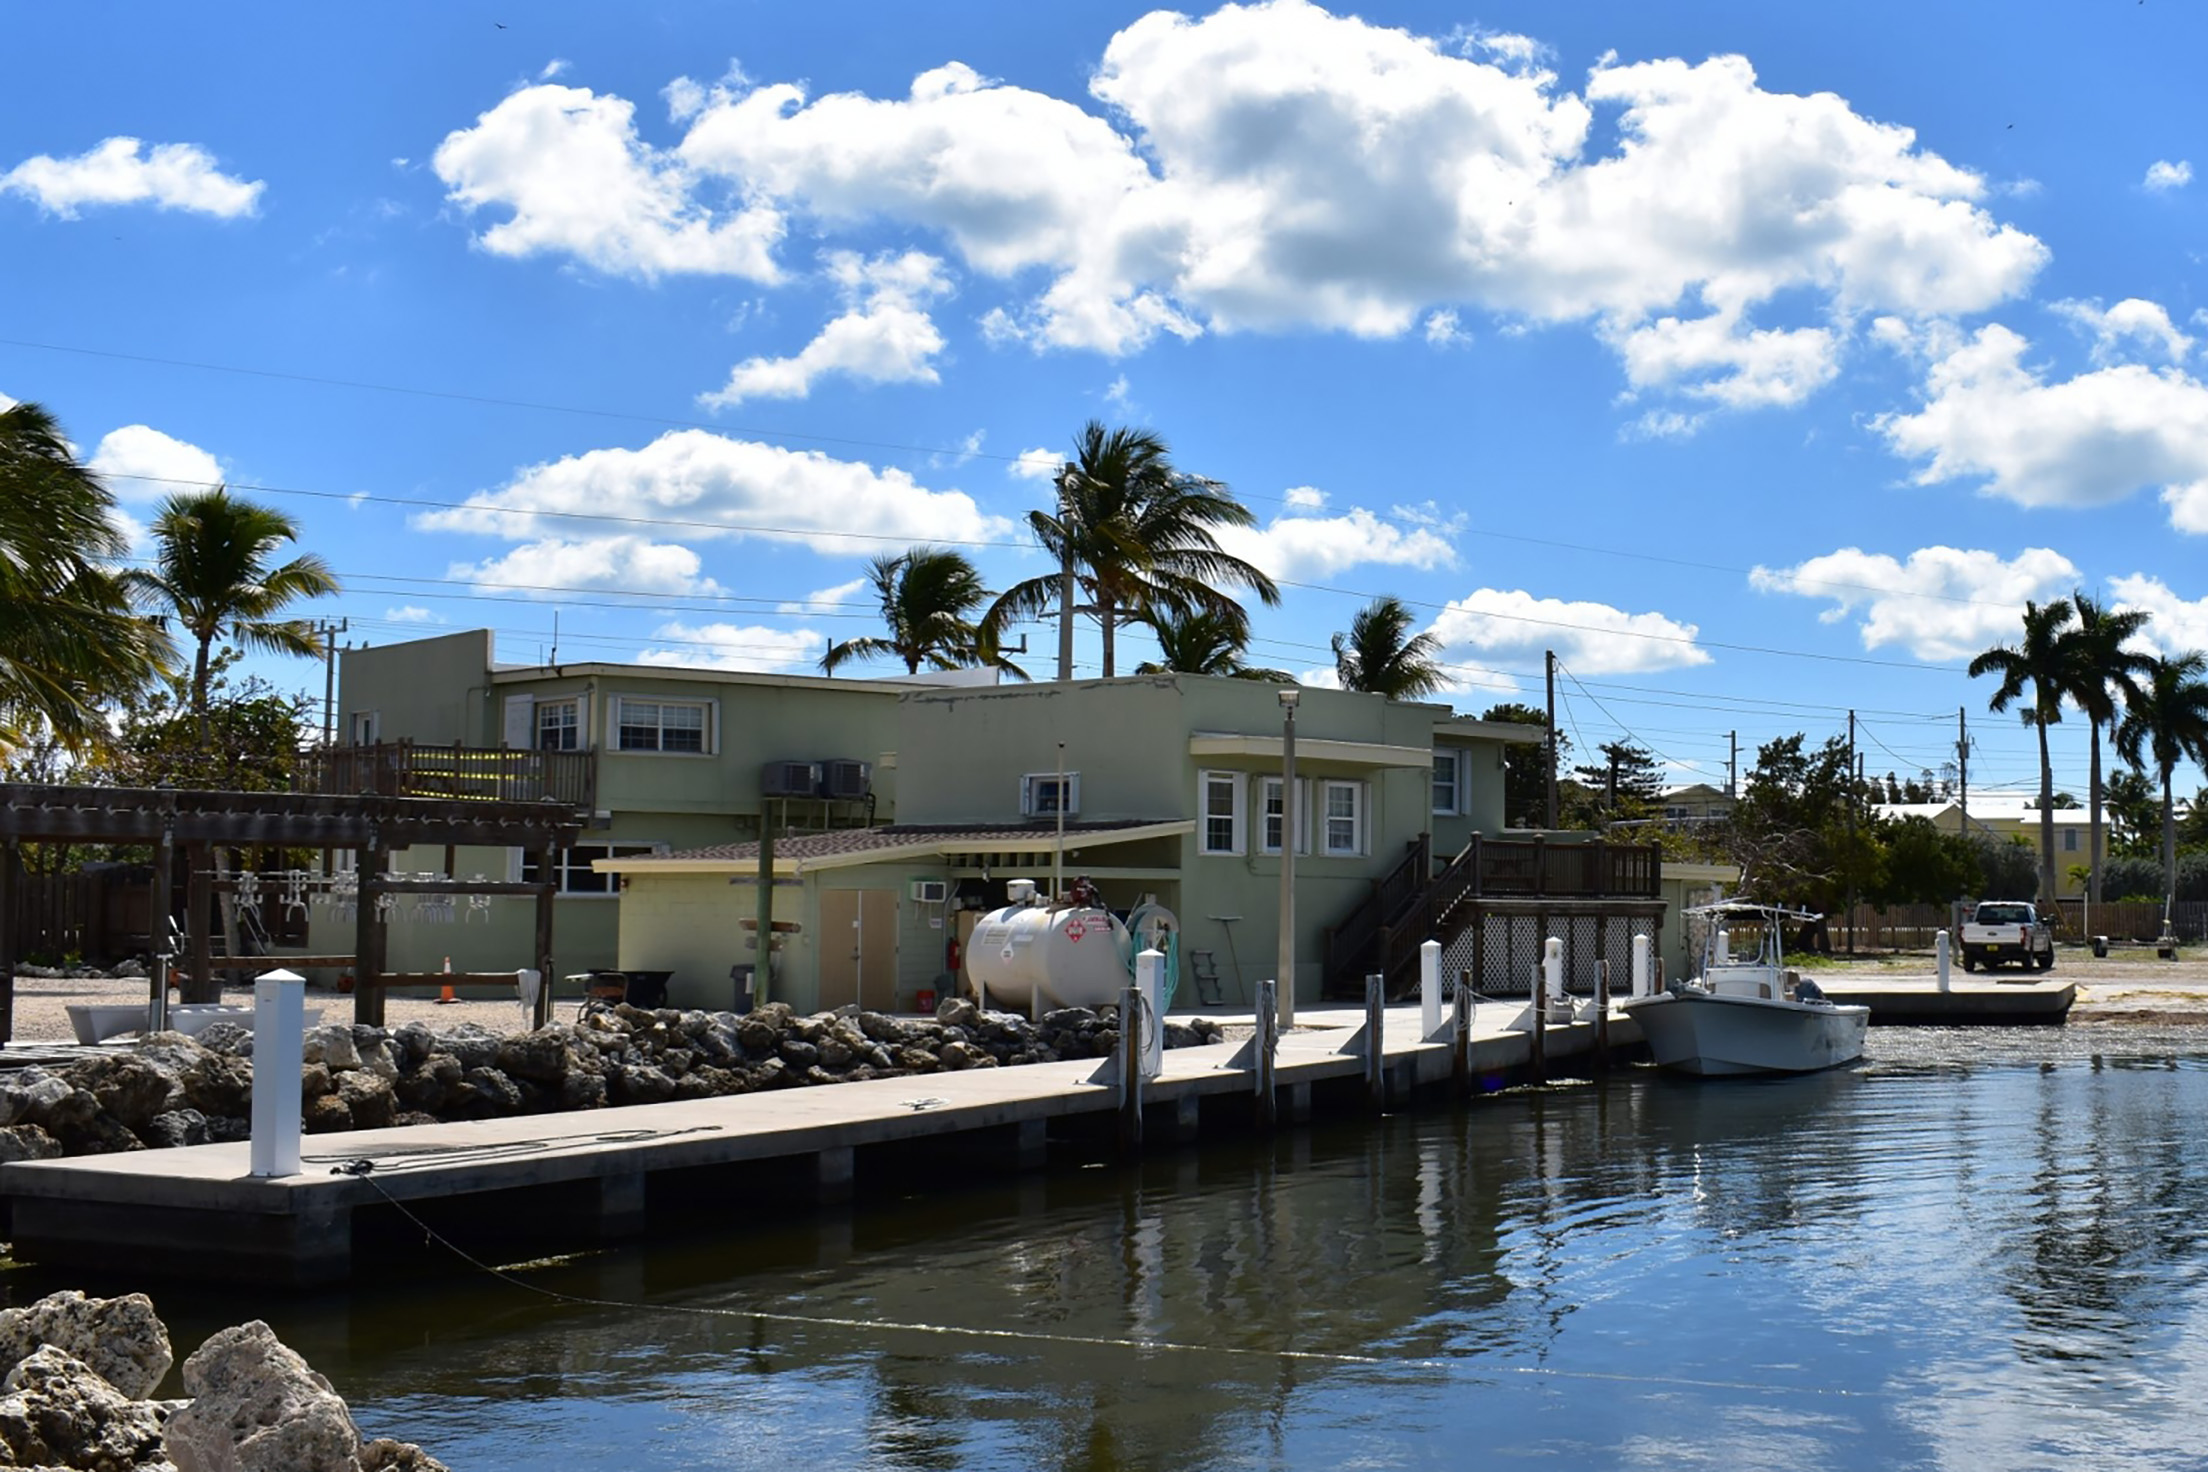 Welcome to the Keys Marine Lab